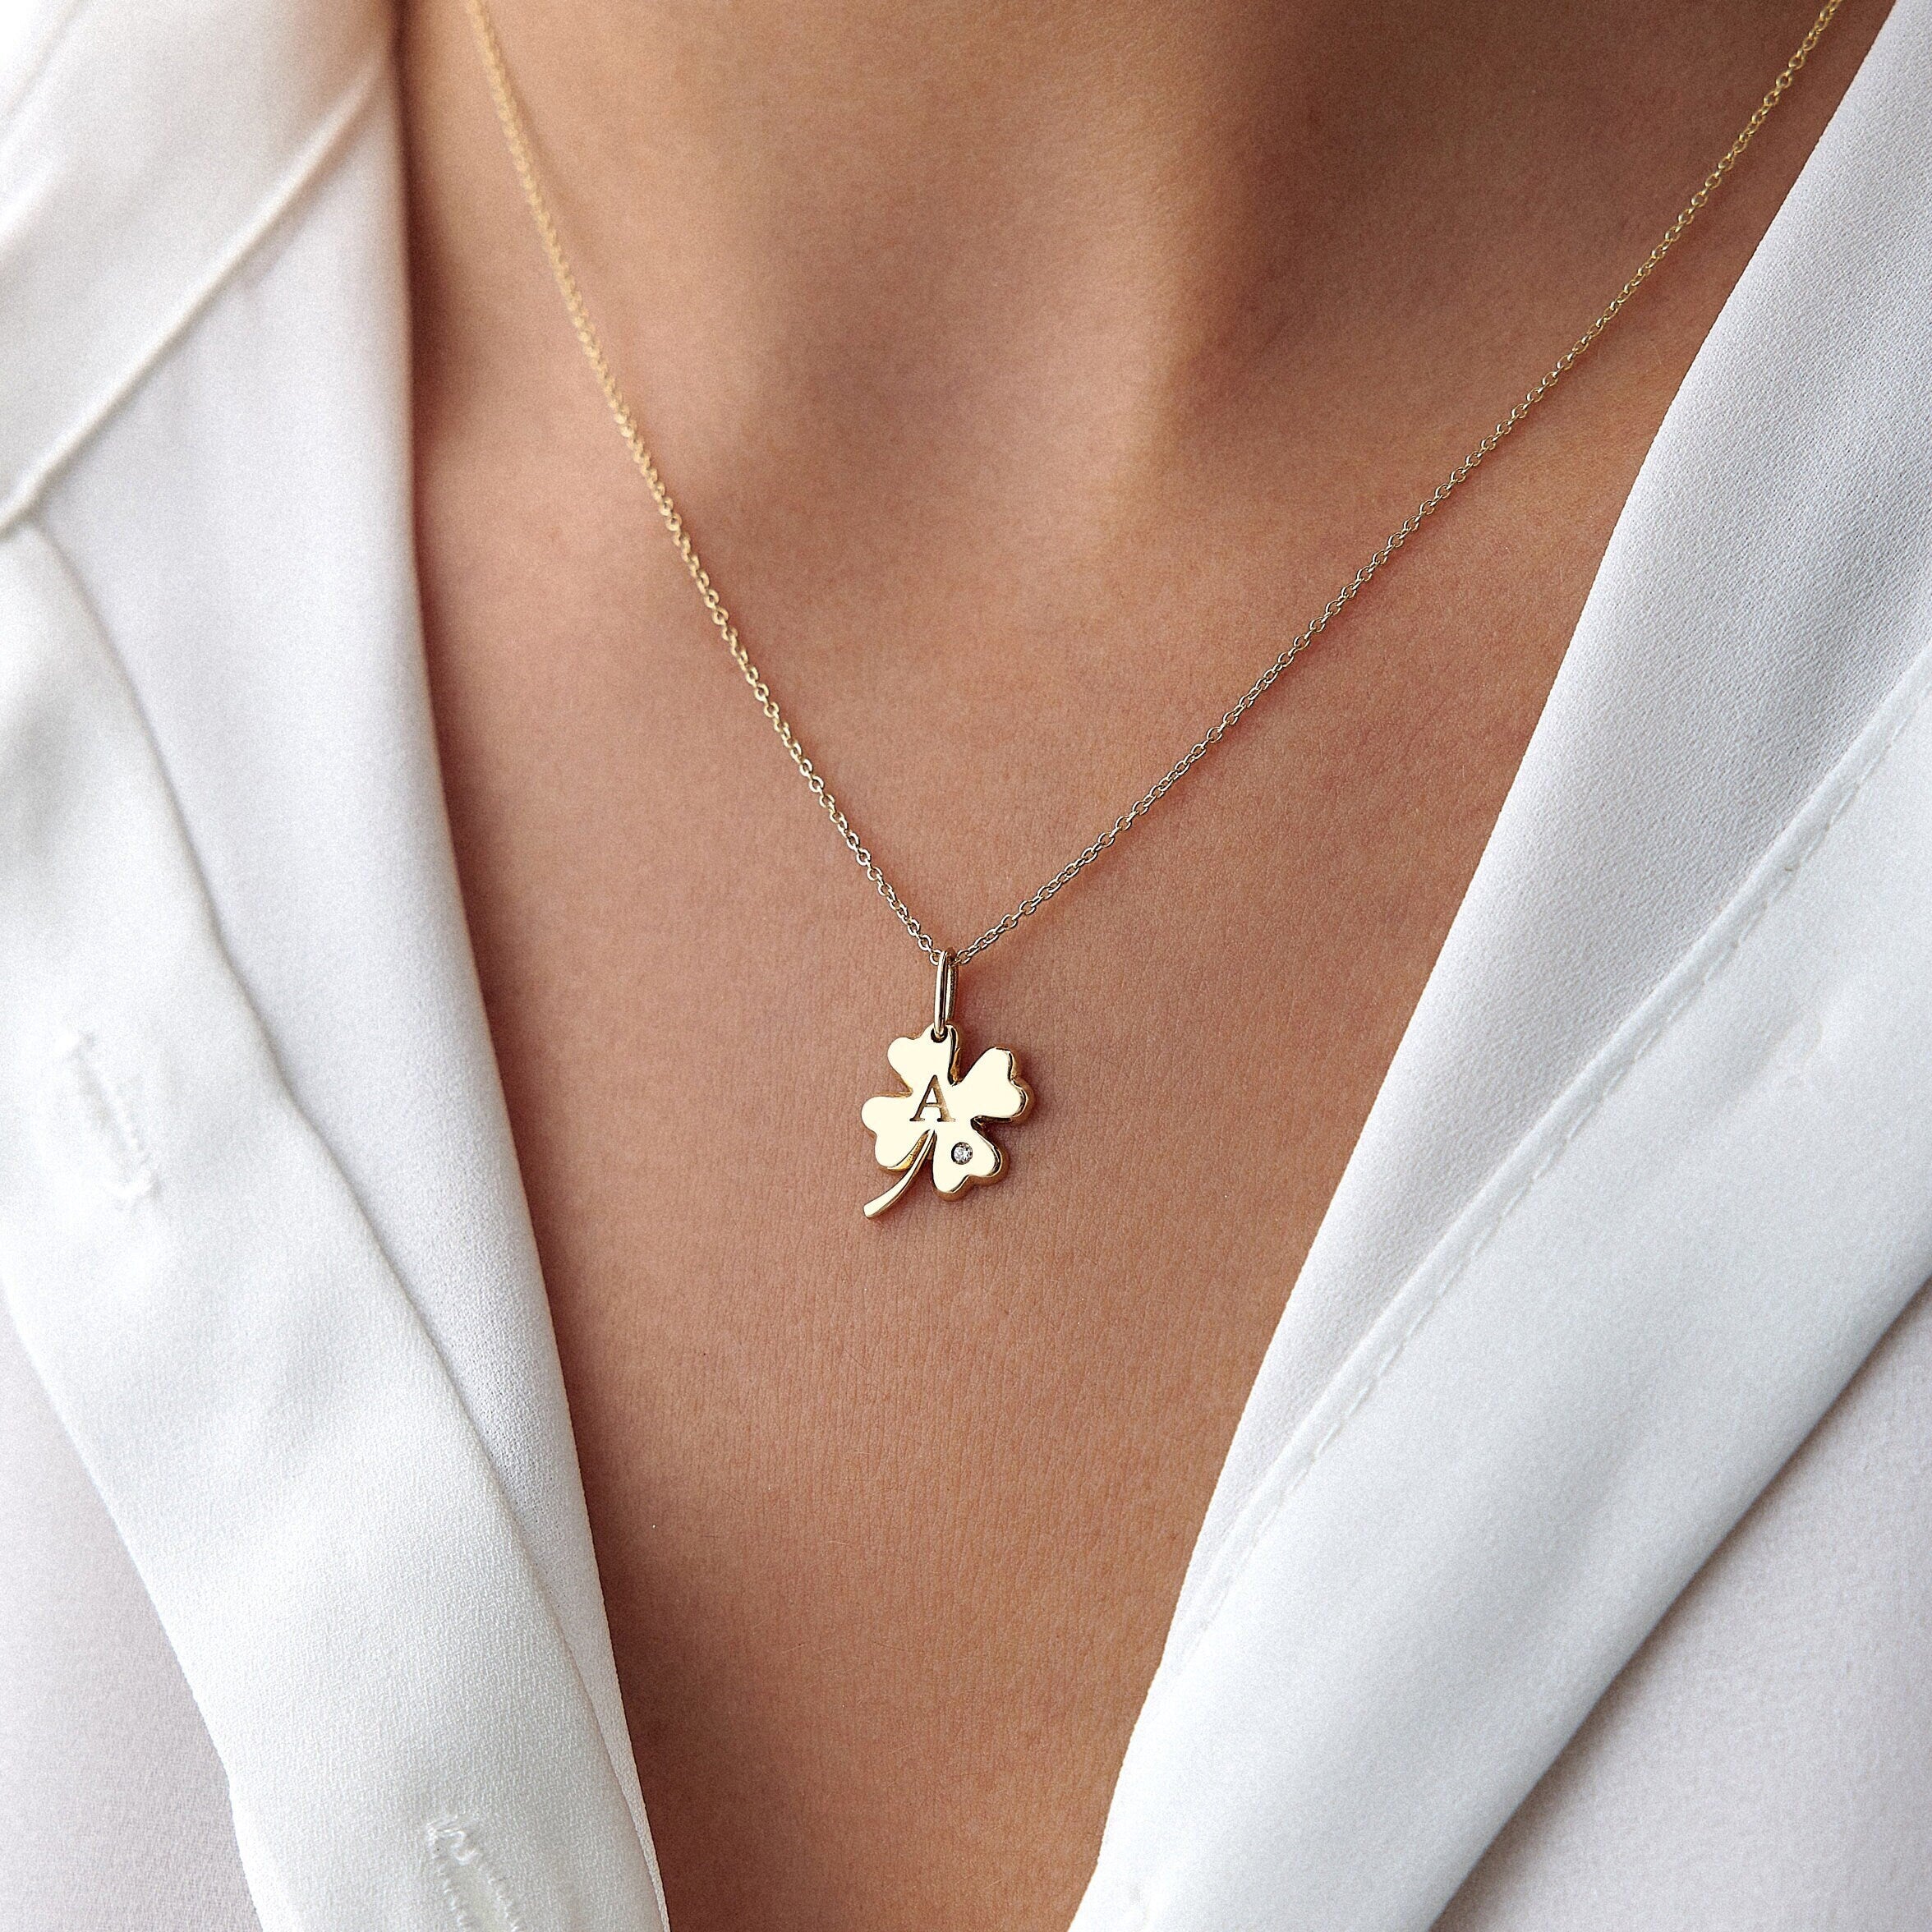 Clover Birthstone Initial Pendant Necklace in 14K Gold